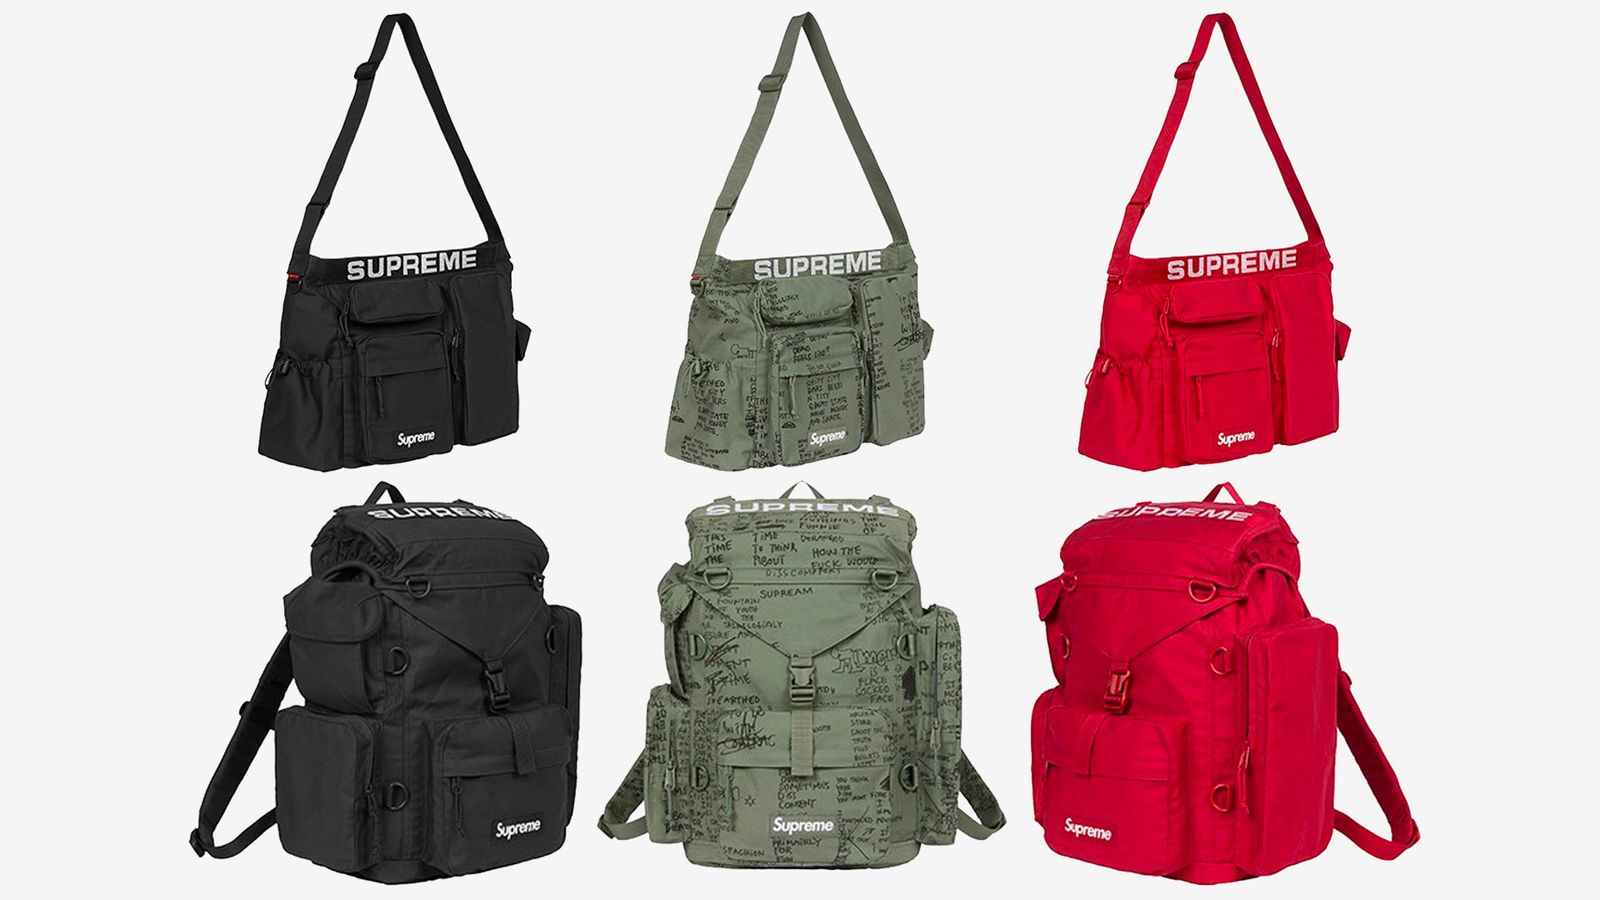 Supreme Spring/Summer 2023 collection - A selection of red, green, and black rucksacks and carry bags.